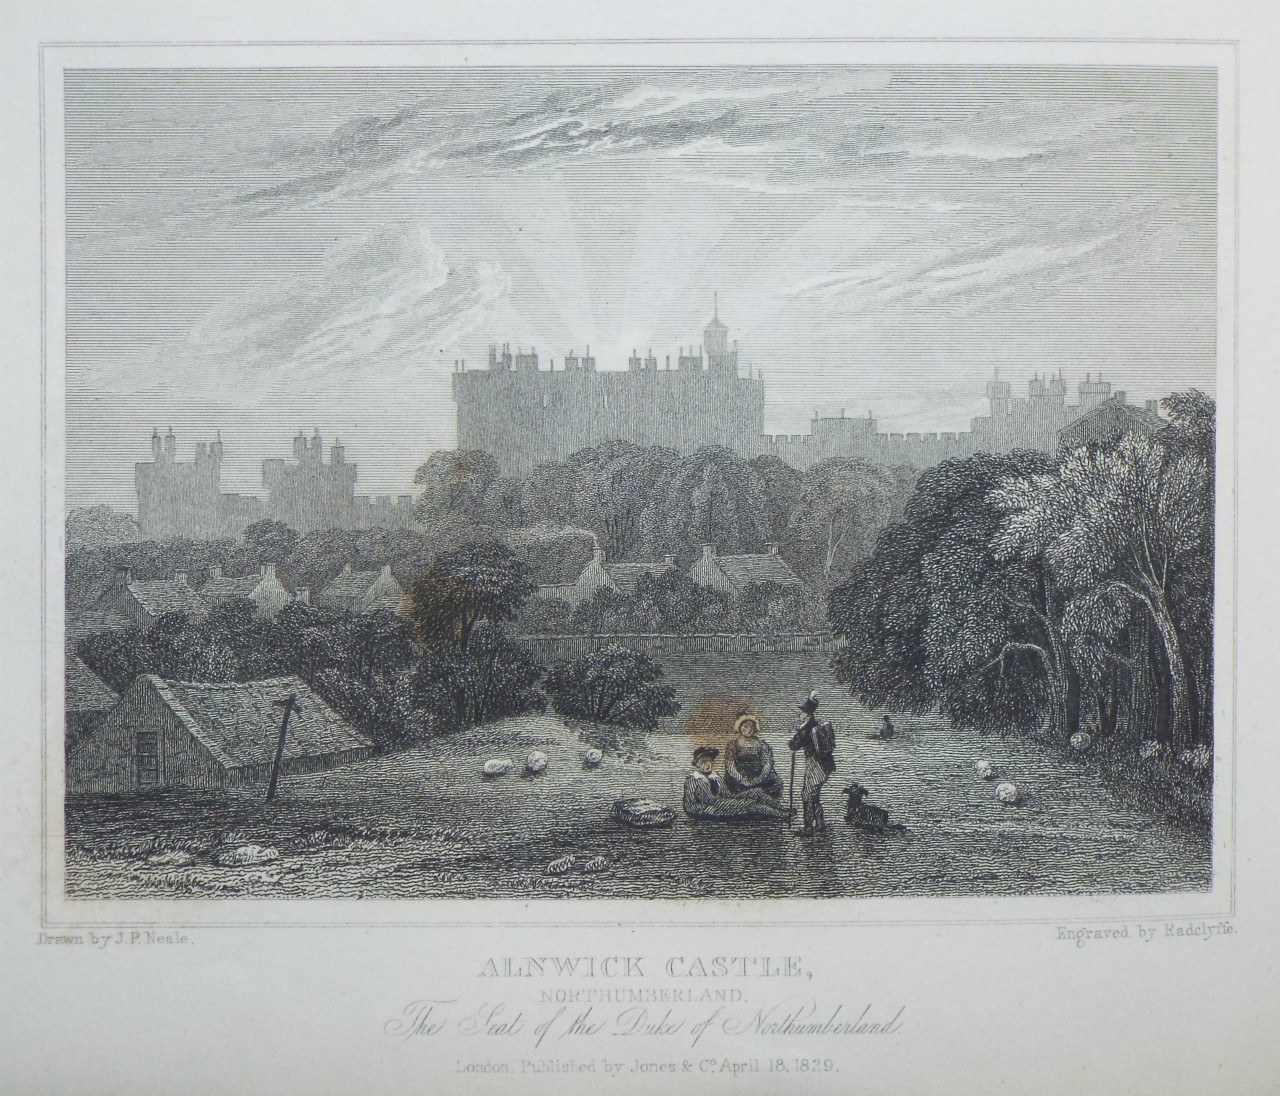 Print - Alnwick Castle, Durham. The Seat of the Duke of Northumberland.  - 